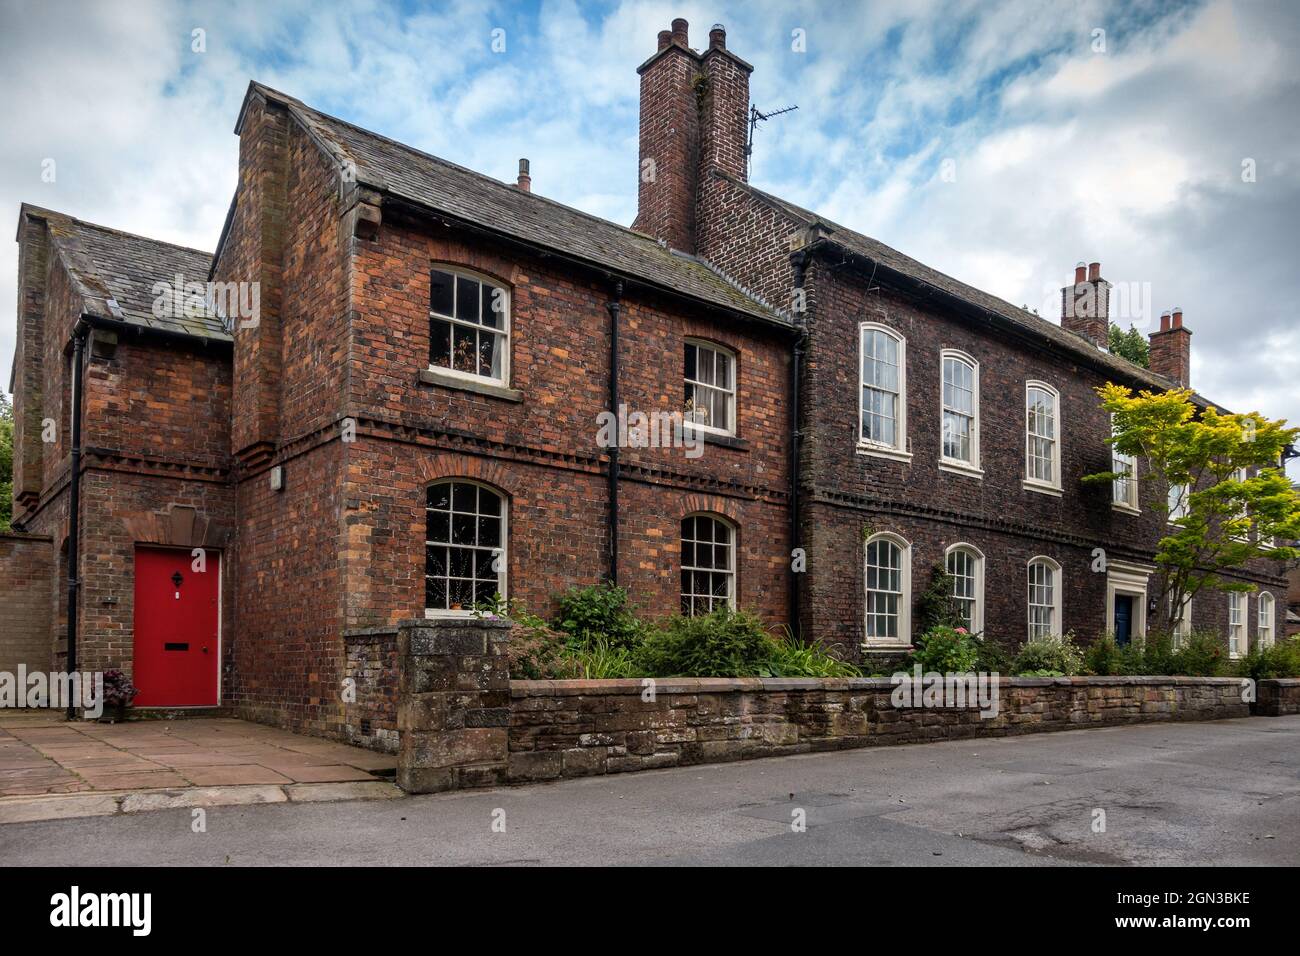 The houses in the grounds of Carlisle Cathedral in the northern city of Carlisle, Cumbria, England, Uk Stock Photo